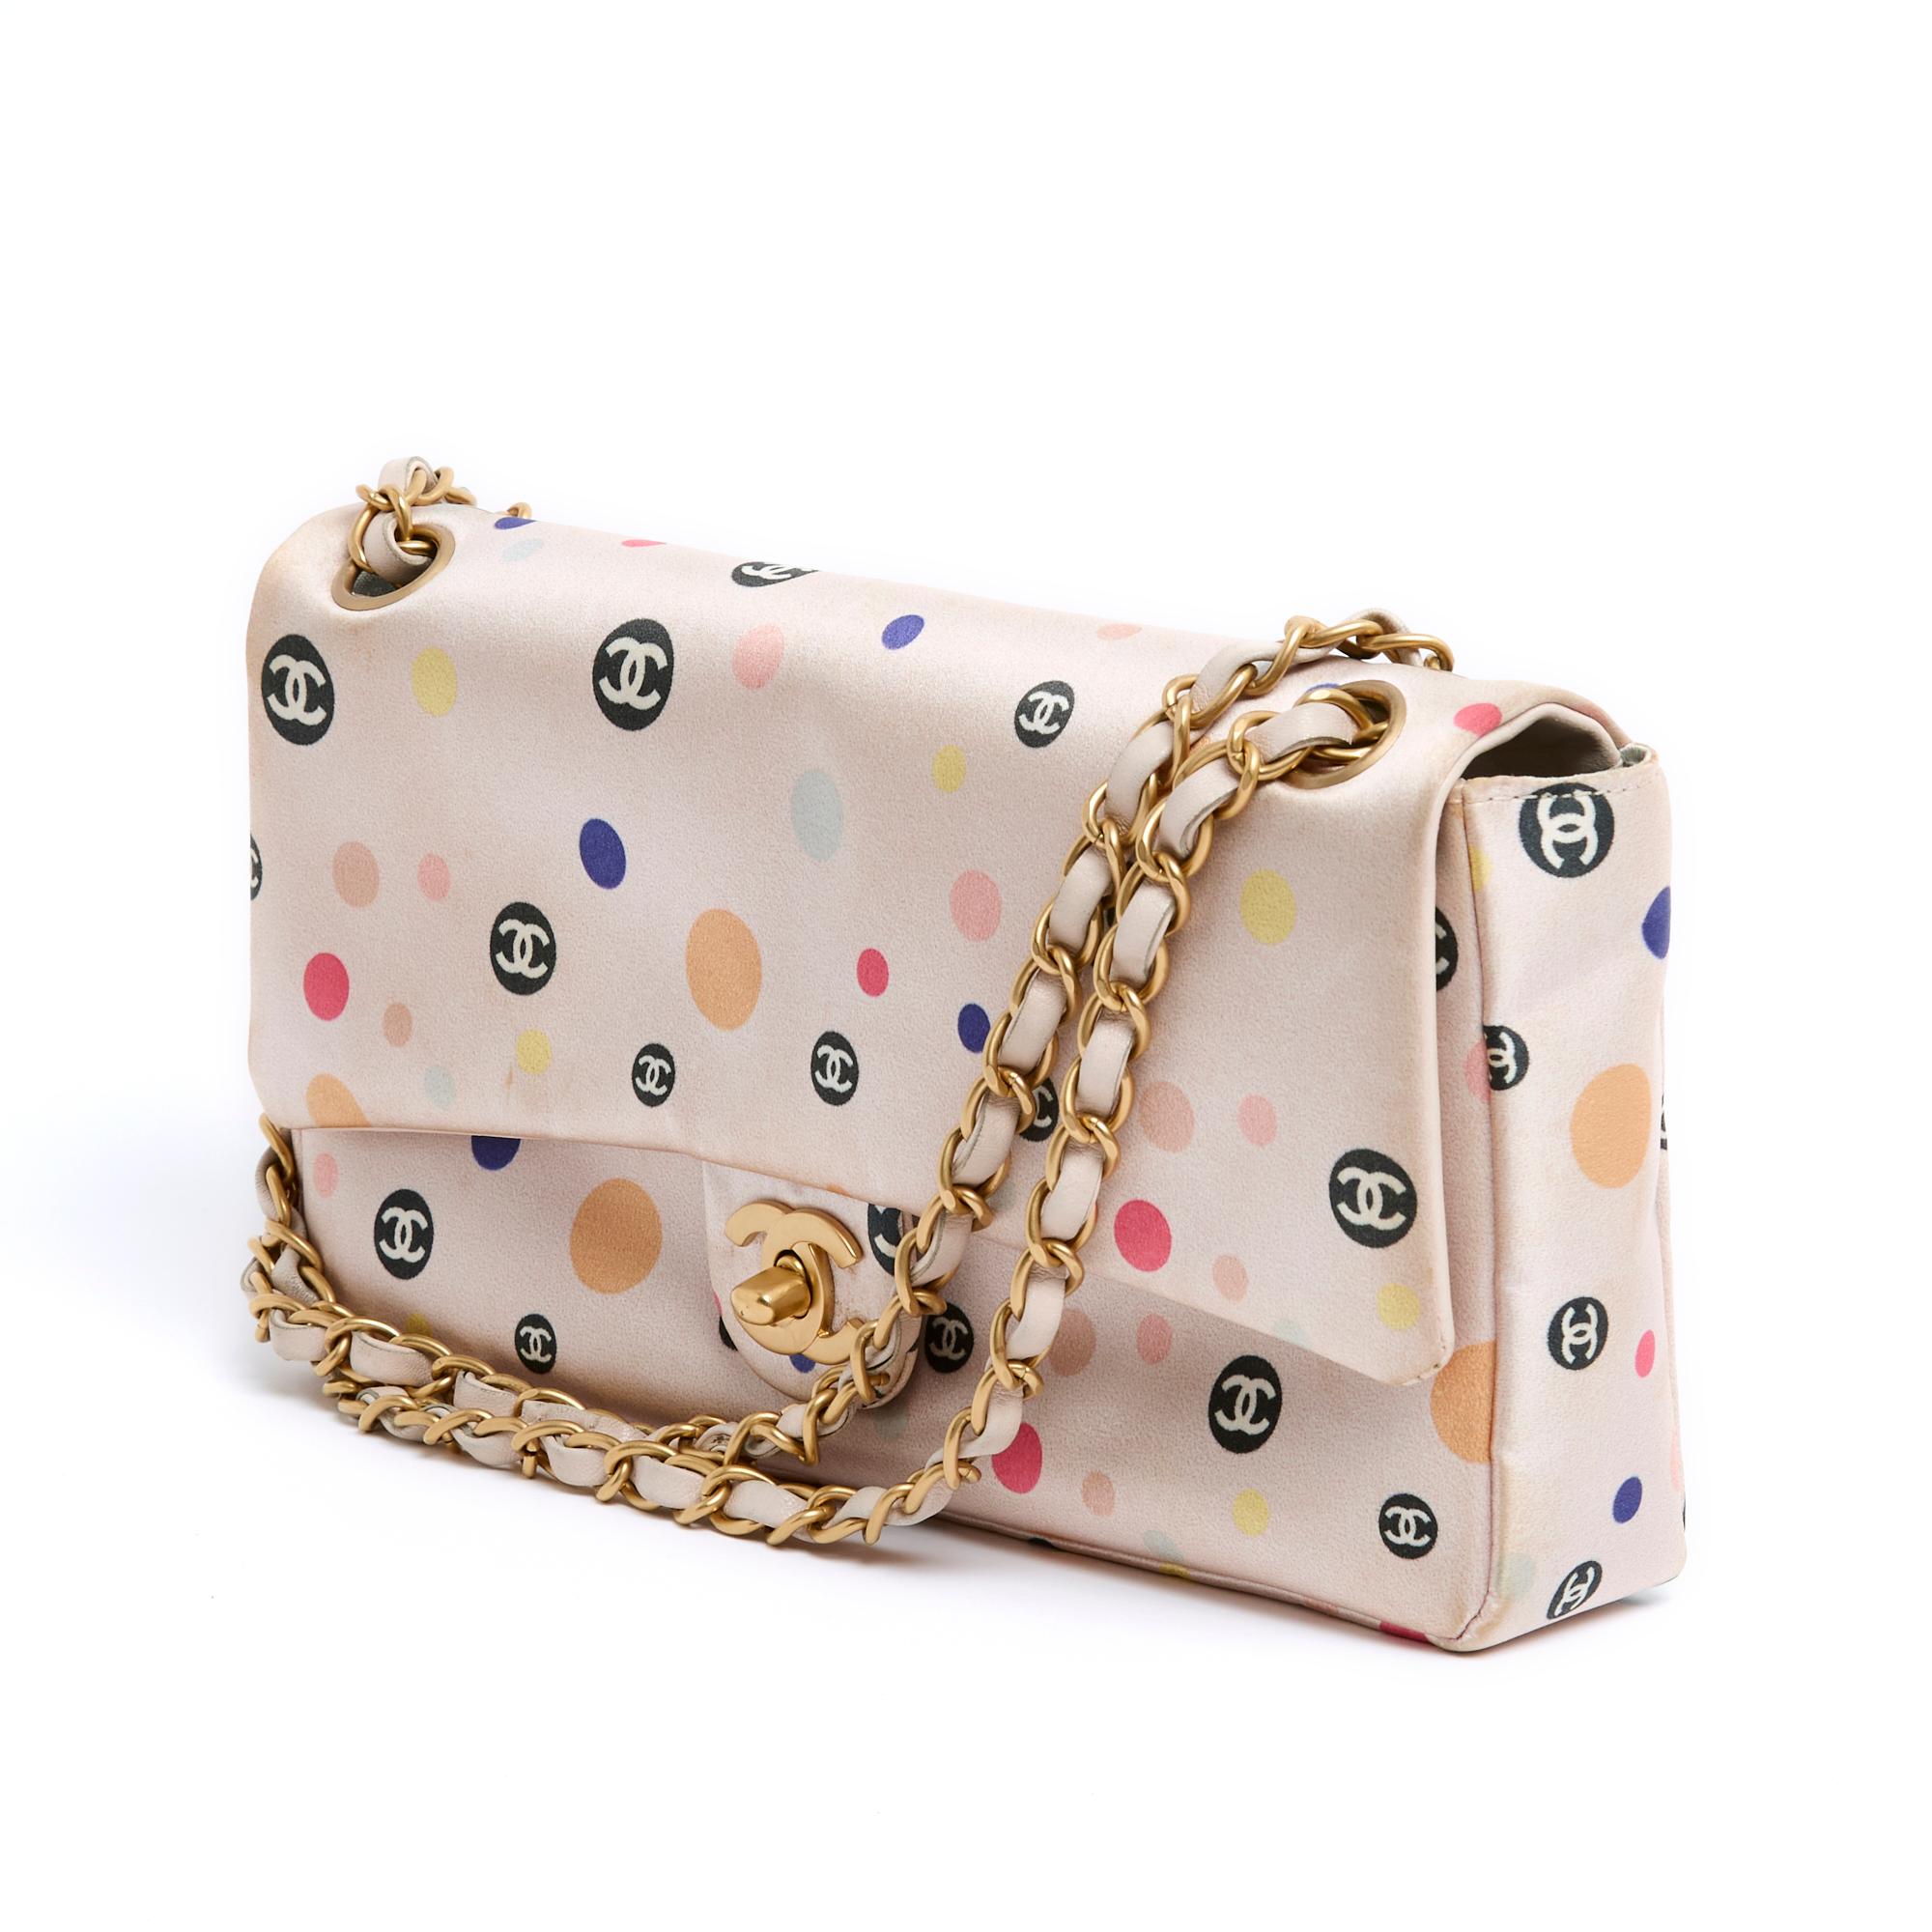 Chanel Timeless or Classic Series single flap bag in pink silk satin printed with multicolored polka dots, the black polka dots being signed with the CC logo, flap closure with quarter-turn clasp in matte gold metal, interior in light blue canvas